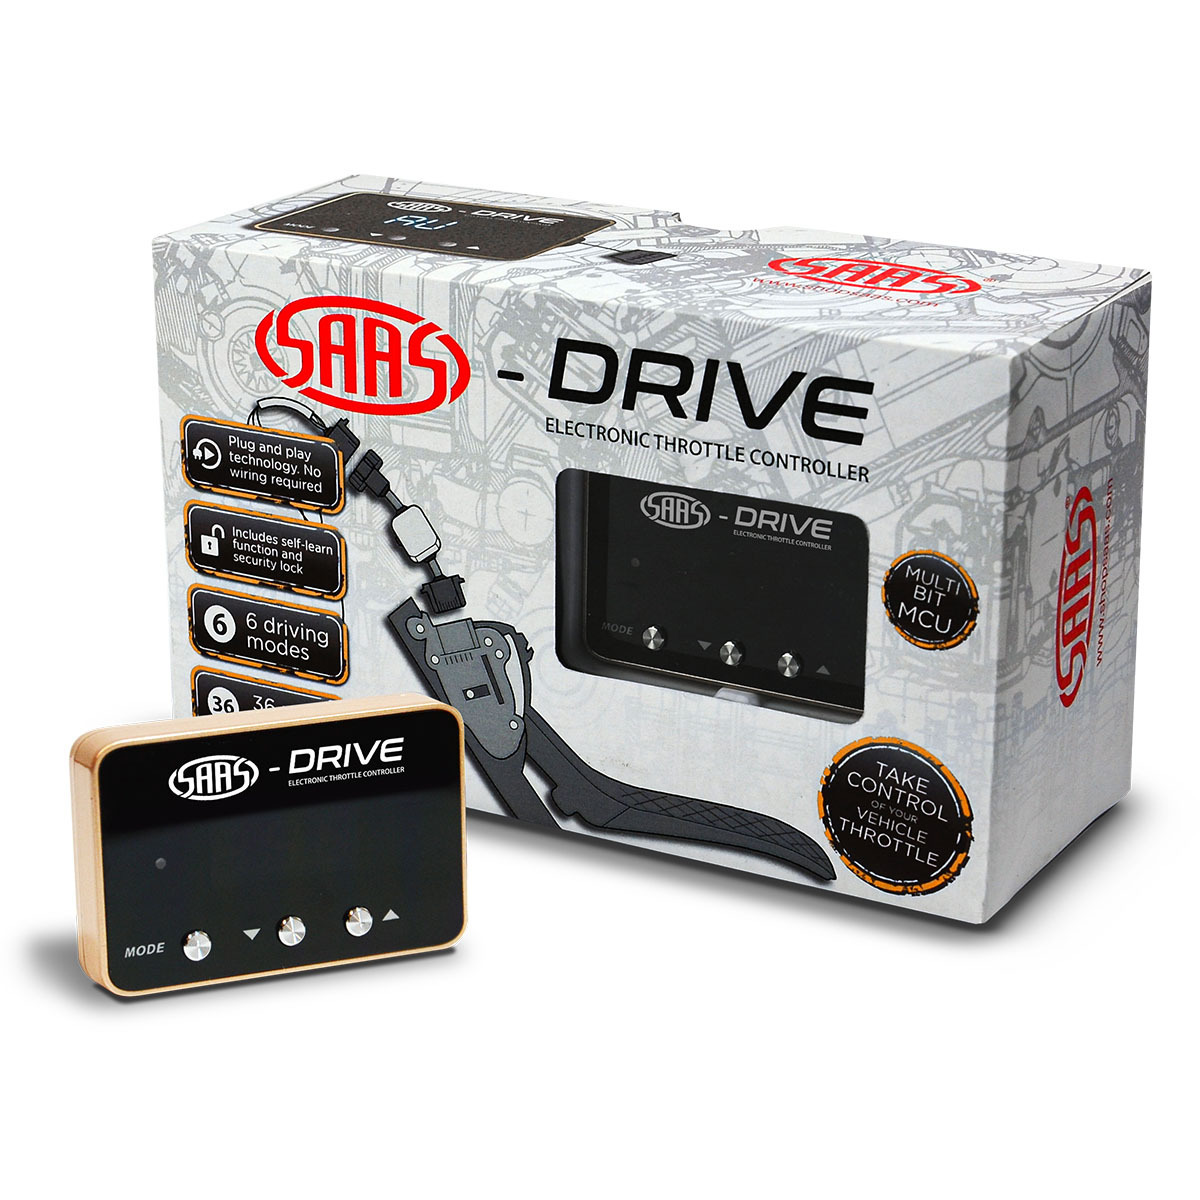 SAAS-Drive Audi A1 1st Generation Facelift and 2nd Gen 2013 > Throttle Controller 